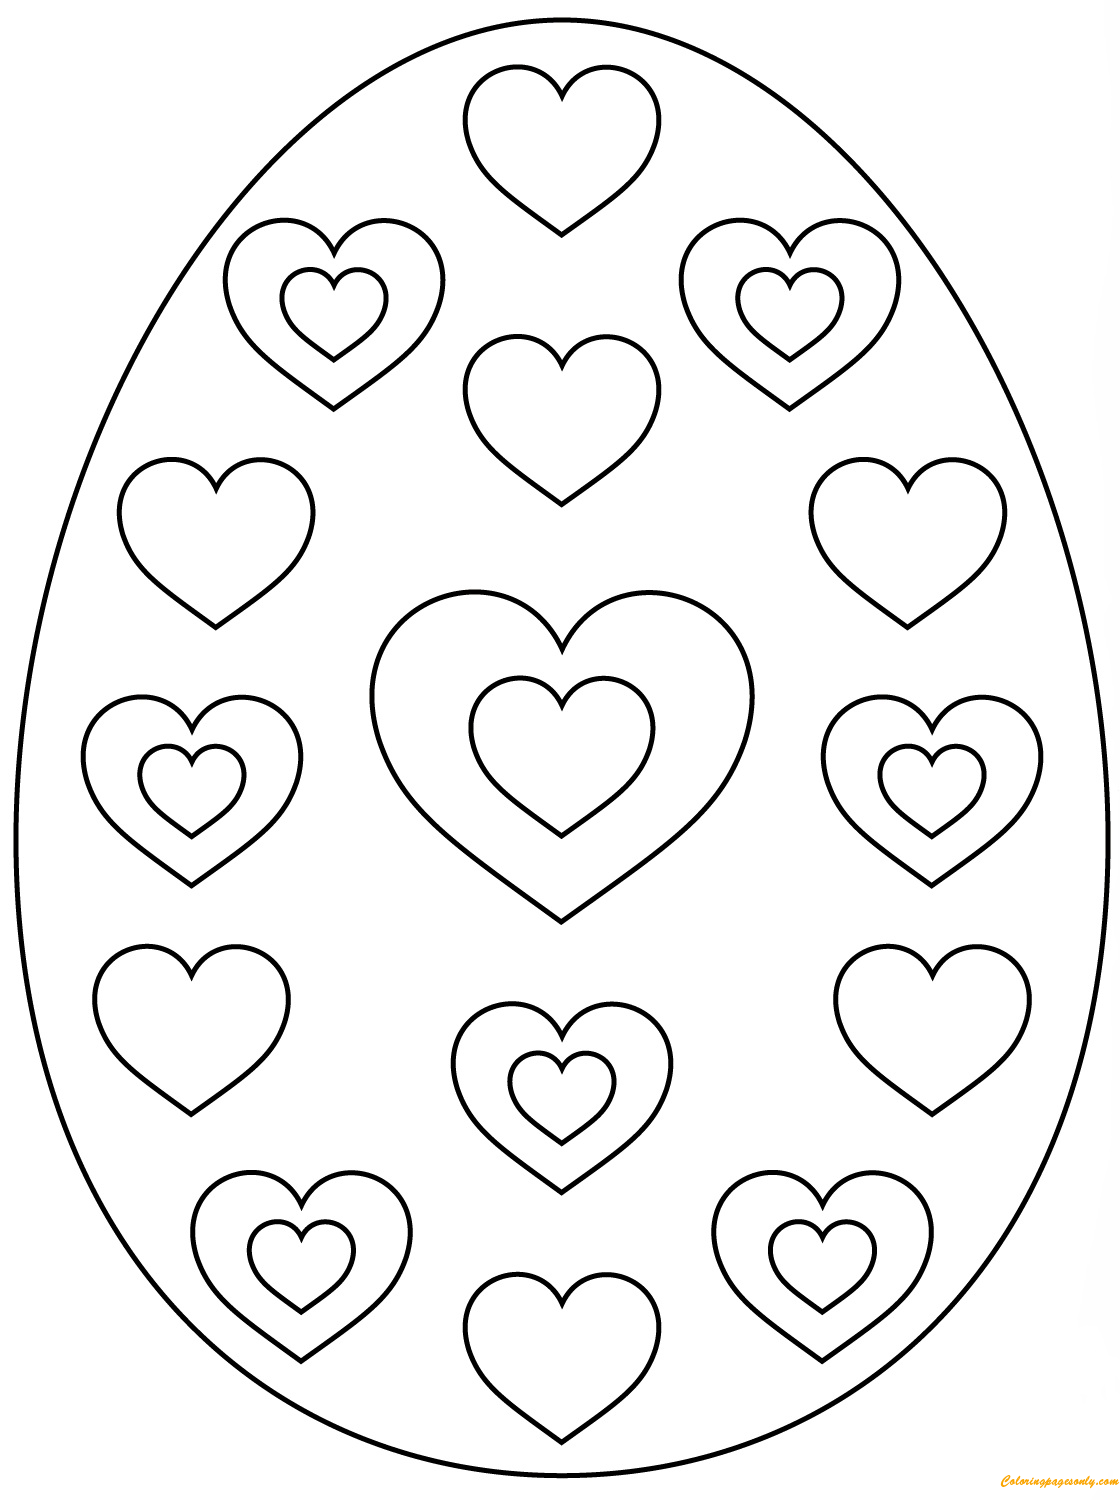 Download Easter Egg Hearts Pattern Coloring Pages - Arts & Culture ...